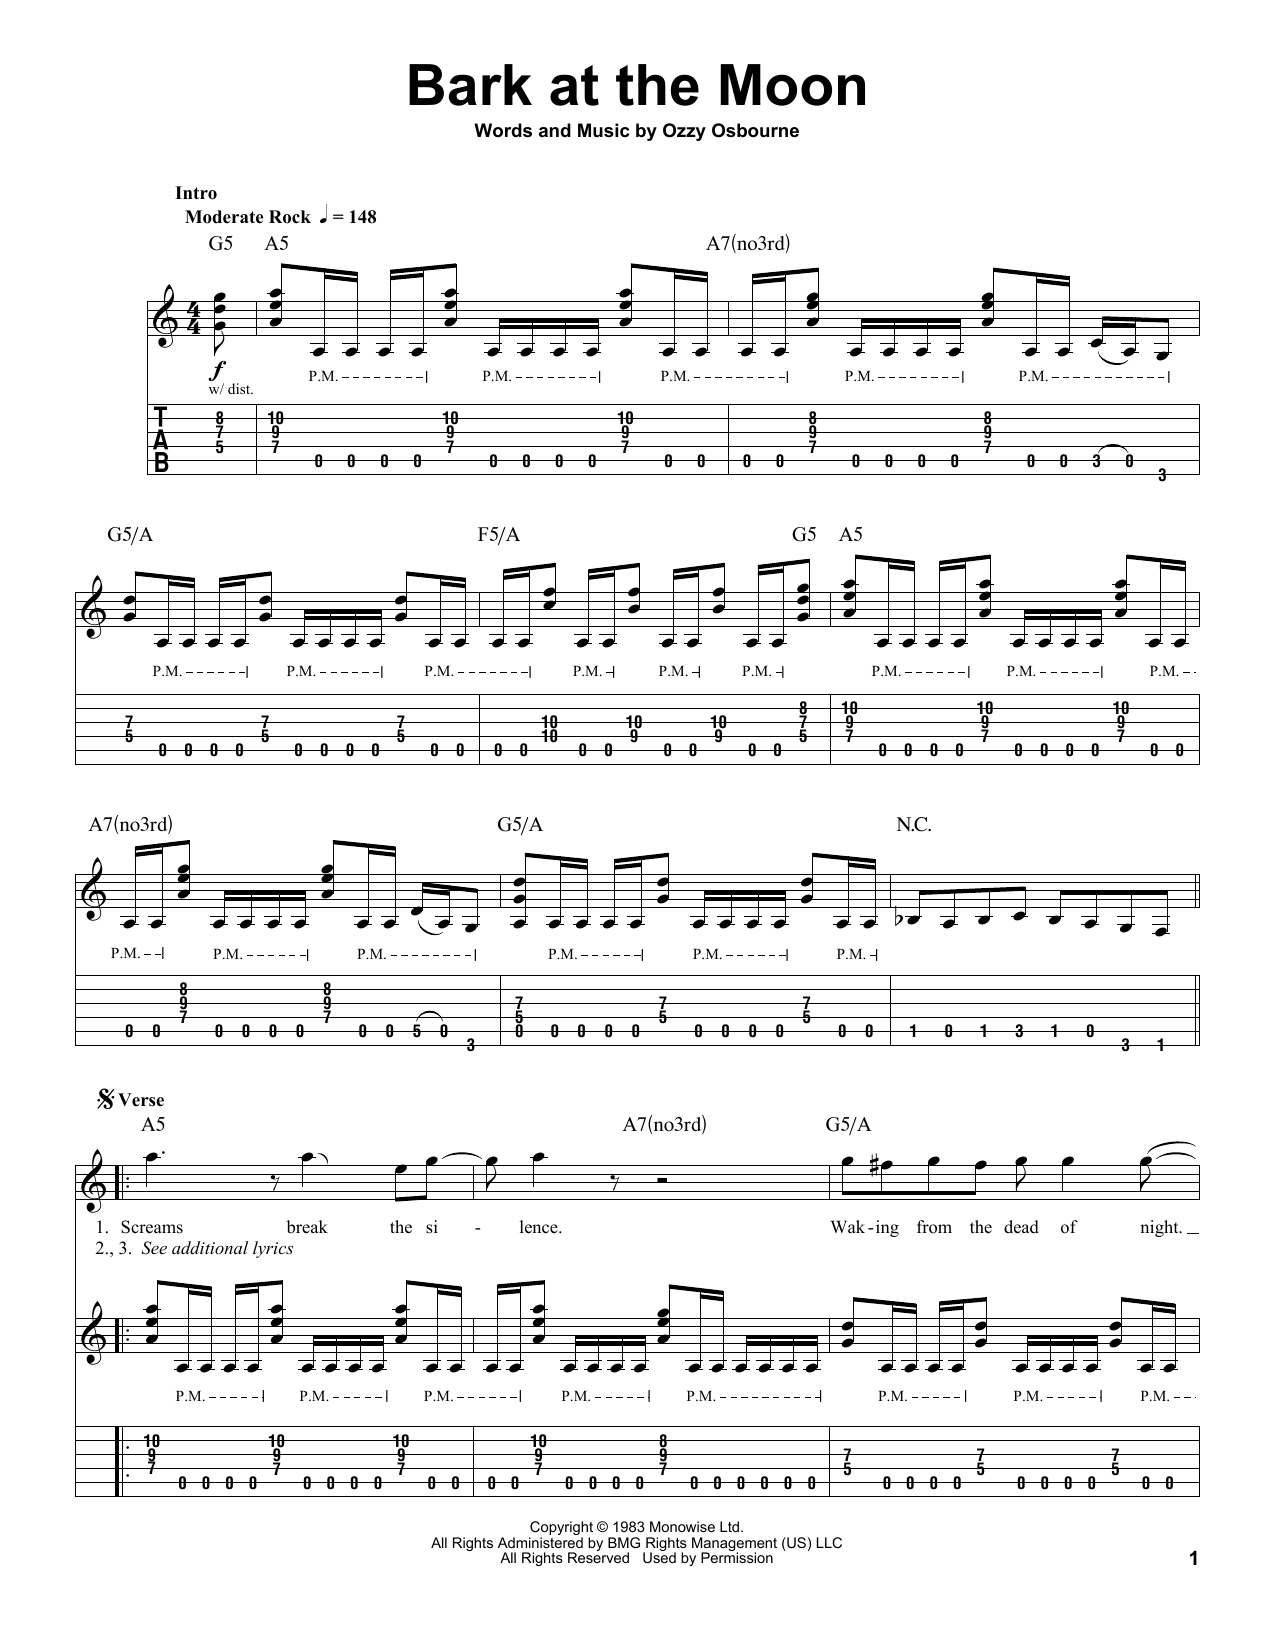 Download Ozzy Osbourne Bark At The Moon Sheet Music